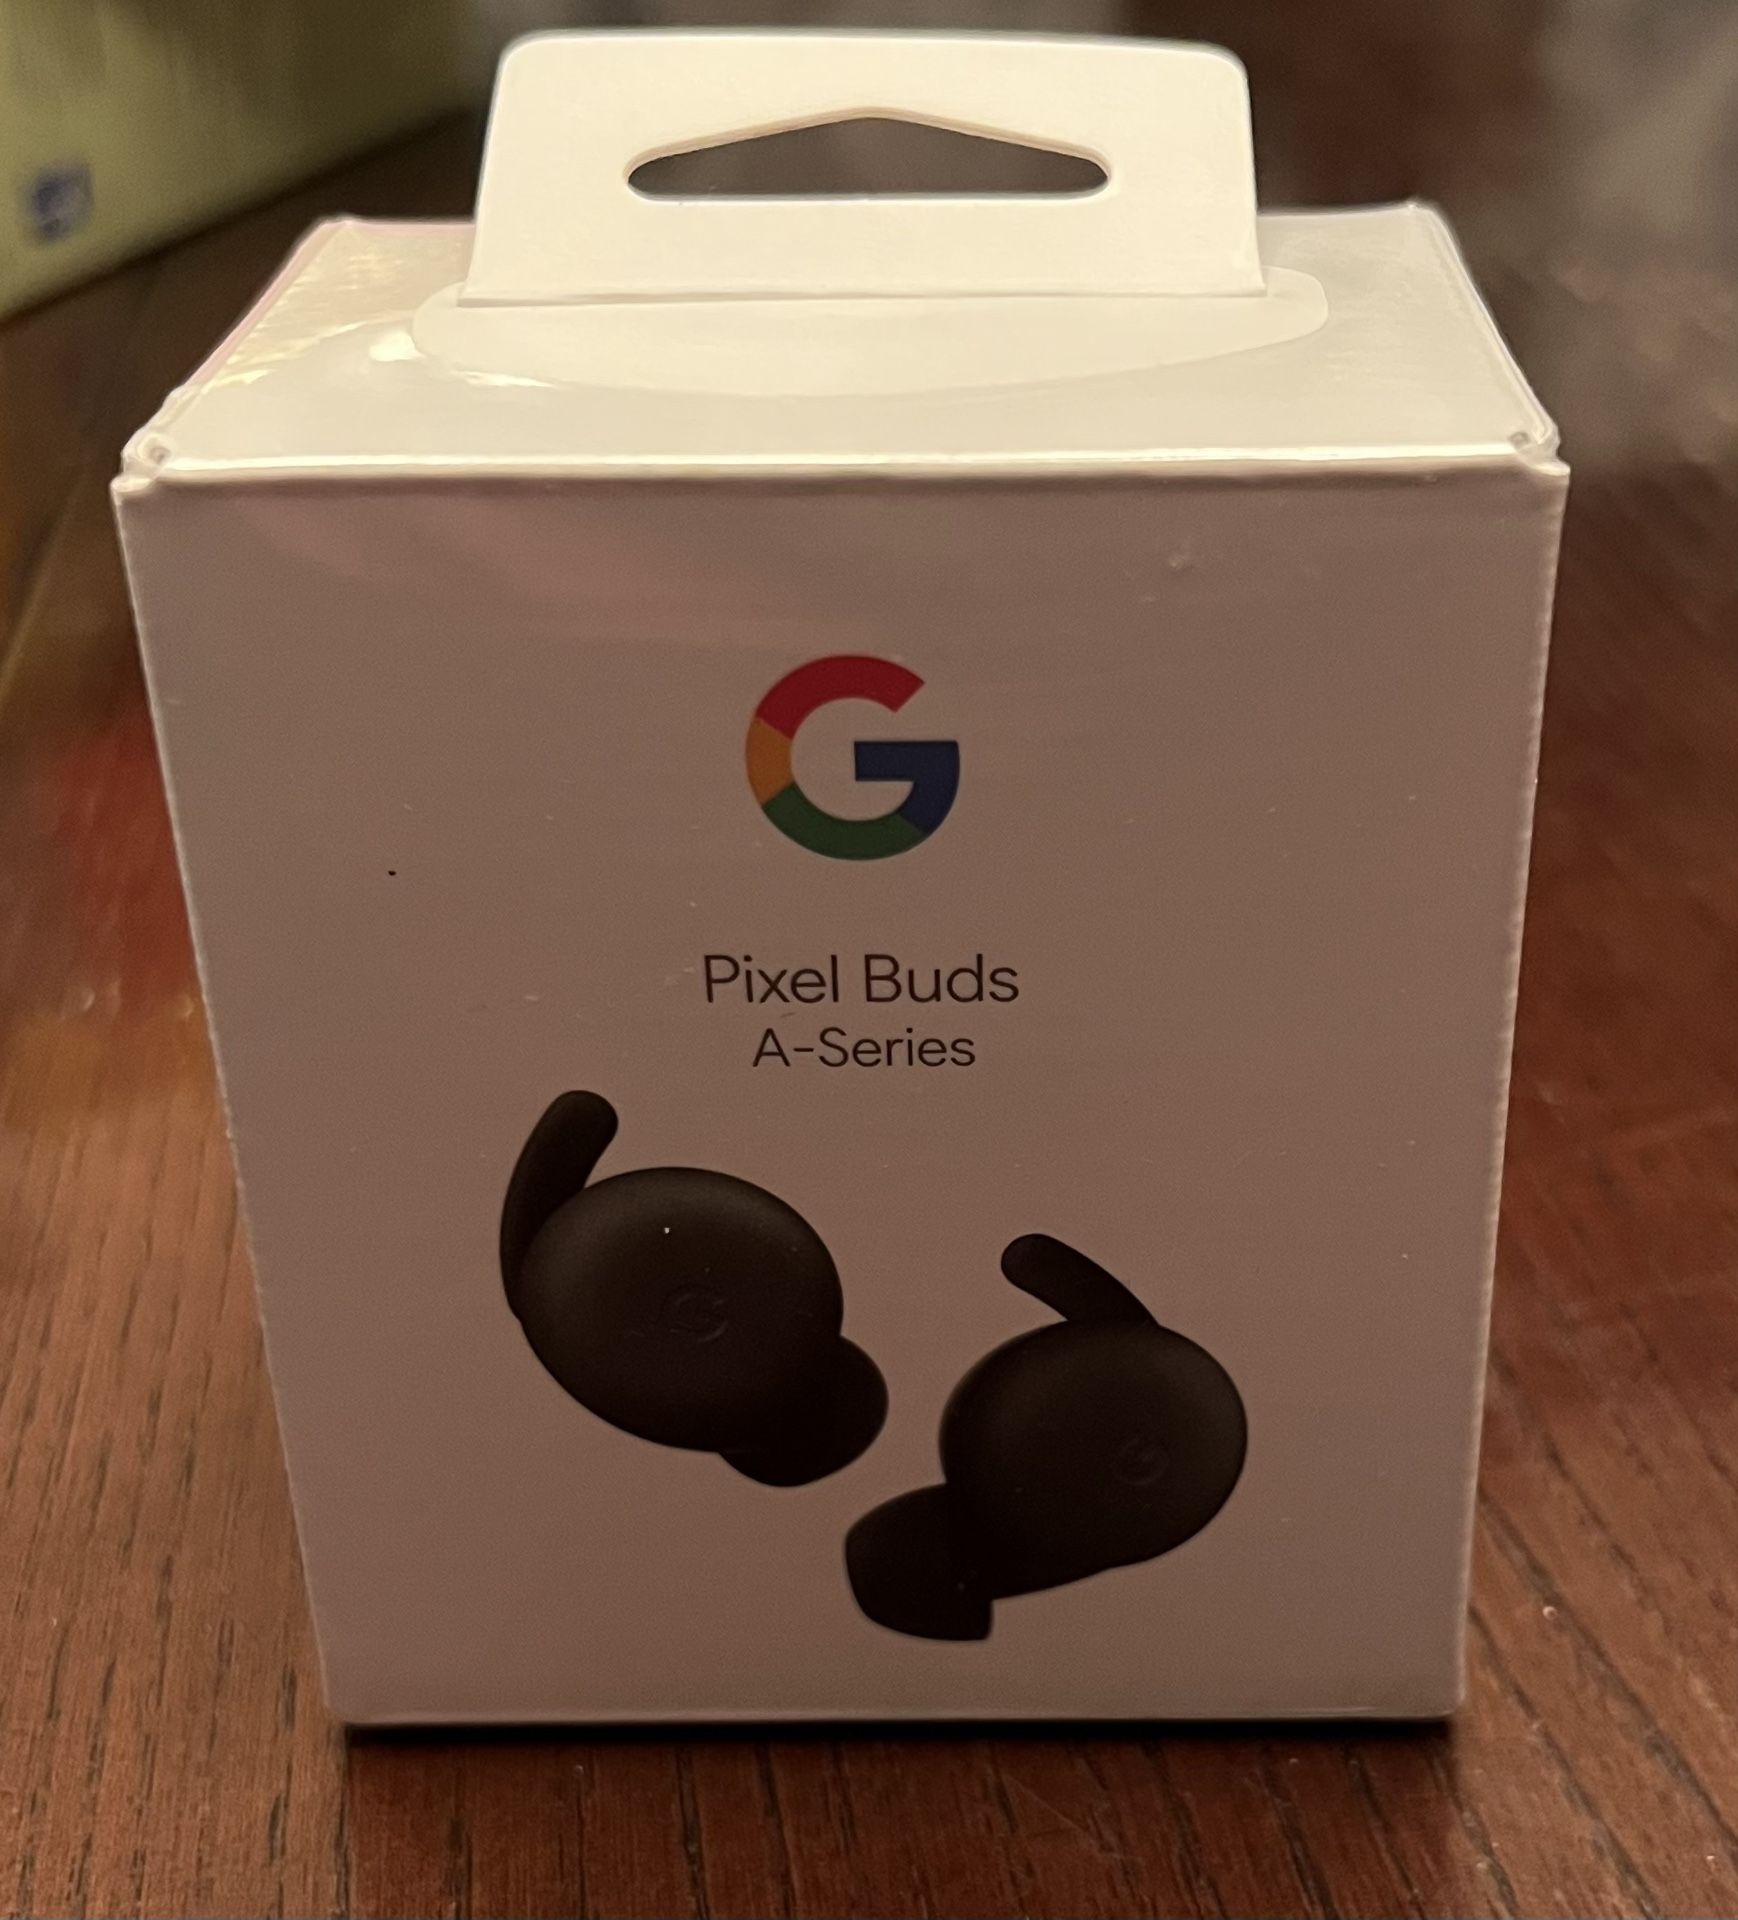 Google Pixel Buds A-Series - Wireless Earbuds - Headphones with Bluetooth - Compatible with Android - Charcoal